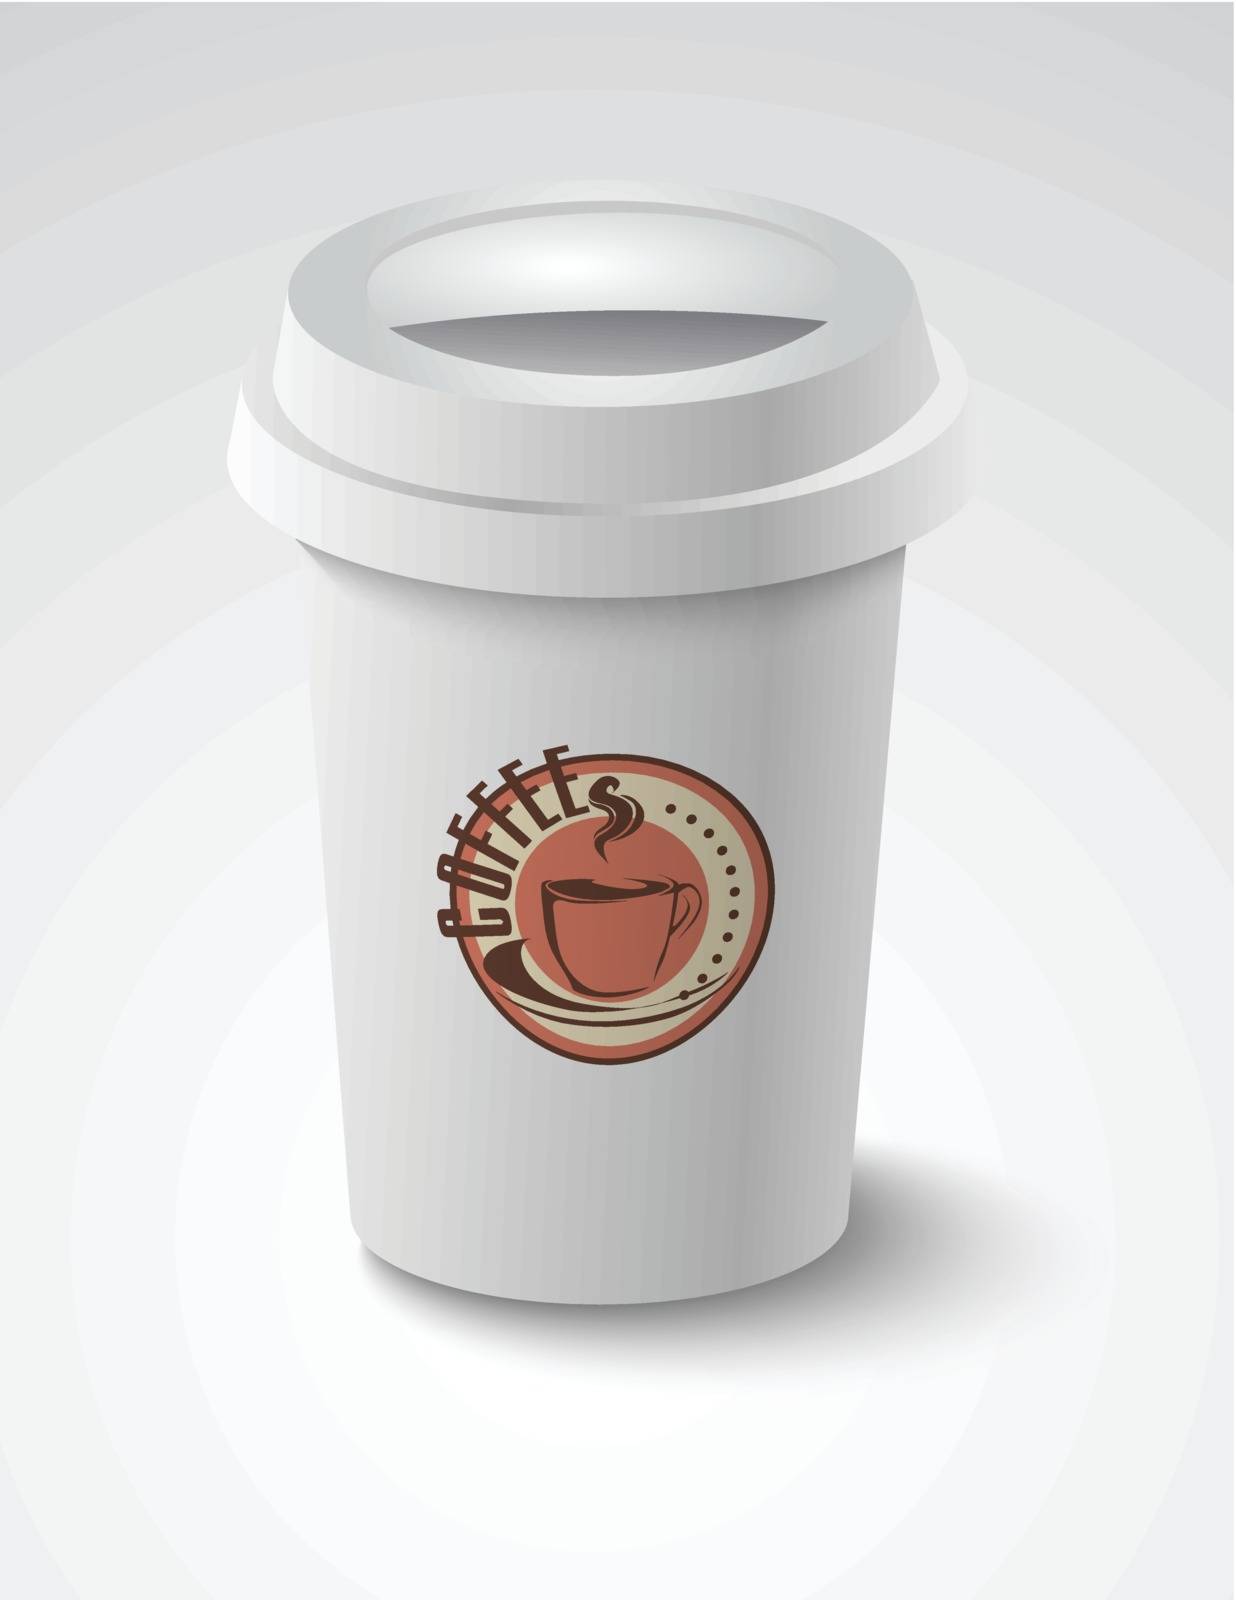 Coffee cup by robin2